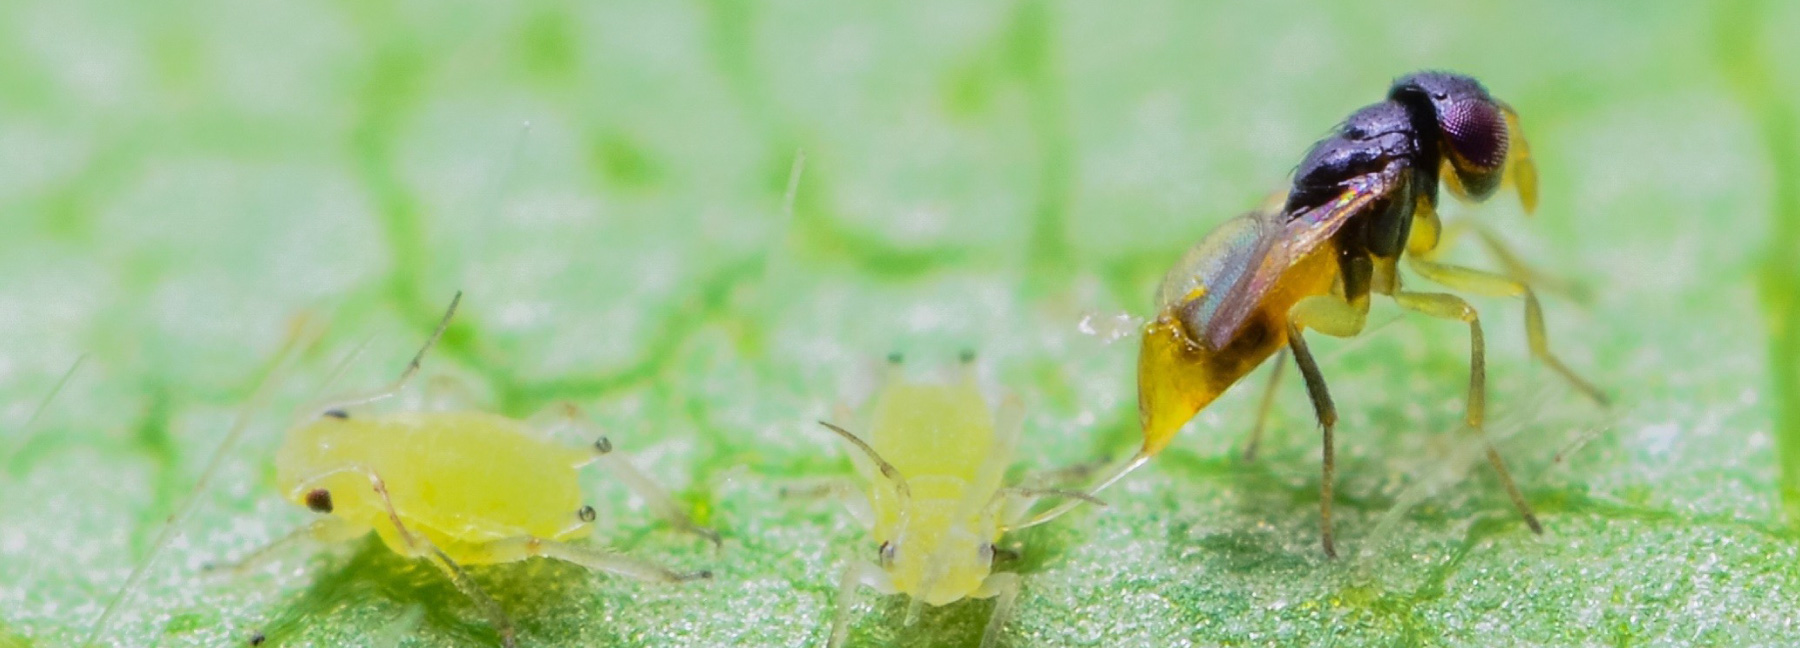 How to Get Rid of Aphids in Your Garden